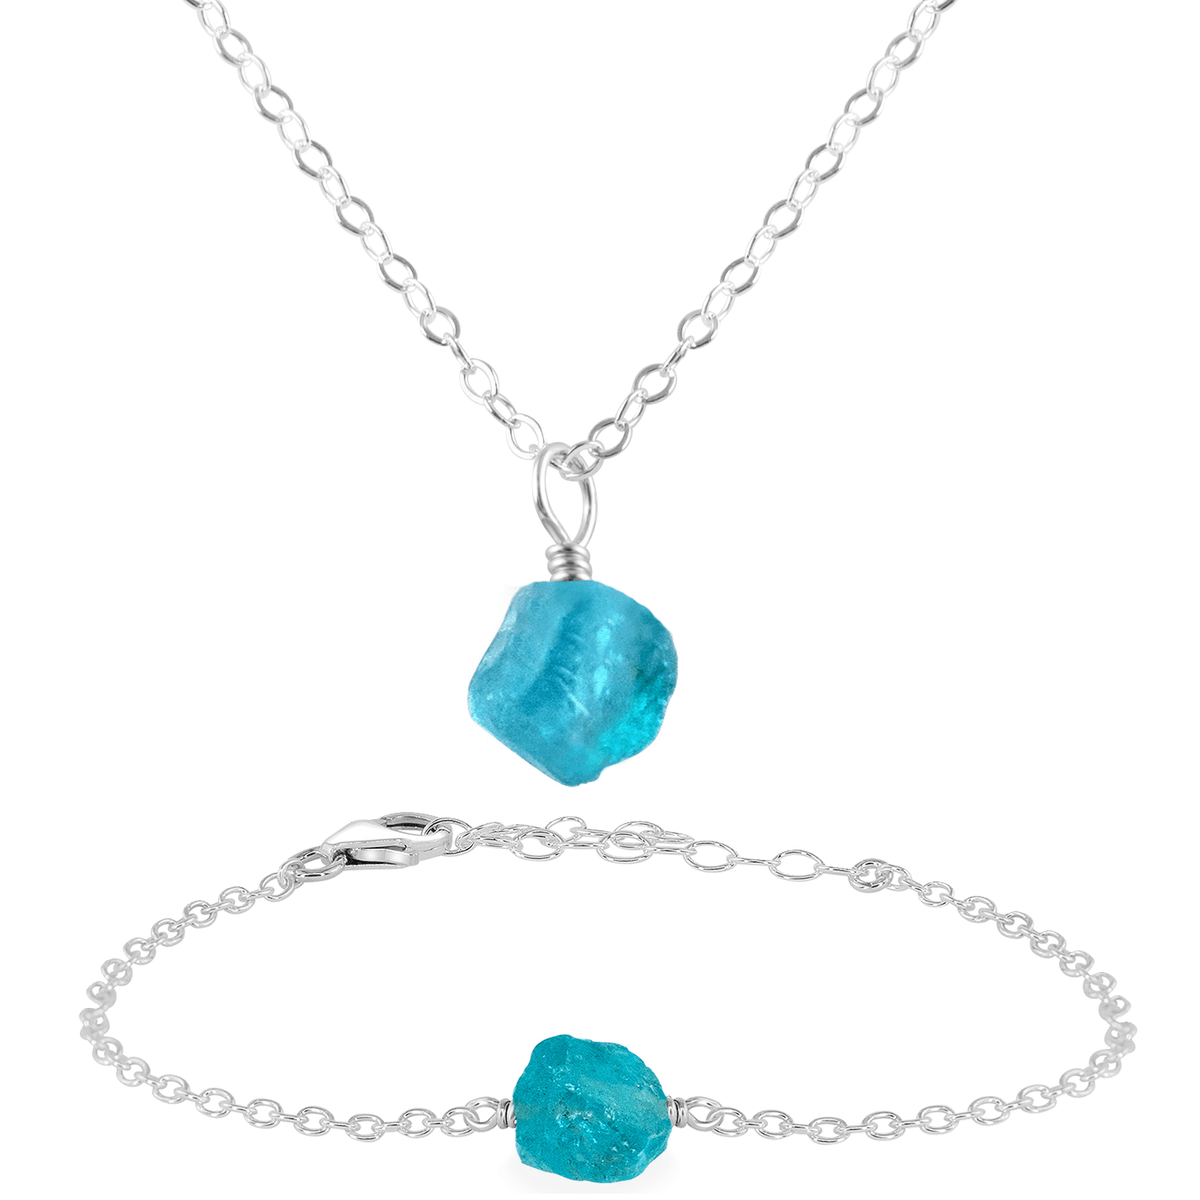 Raw Apatite Crystal Earrings & Necklace Set - Raw Apatite Crystal Earrings & Necklace Set - Sterling Silver / Cable / Necklace & Bracelet - Luna Tide Handmade Crystal Jewellery